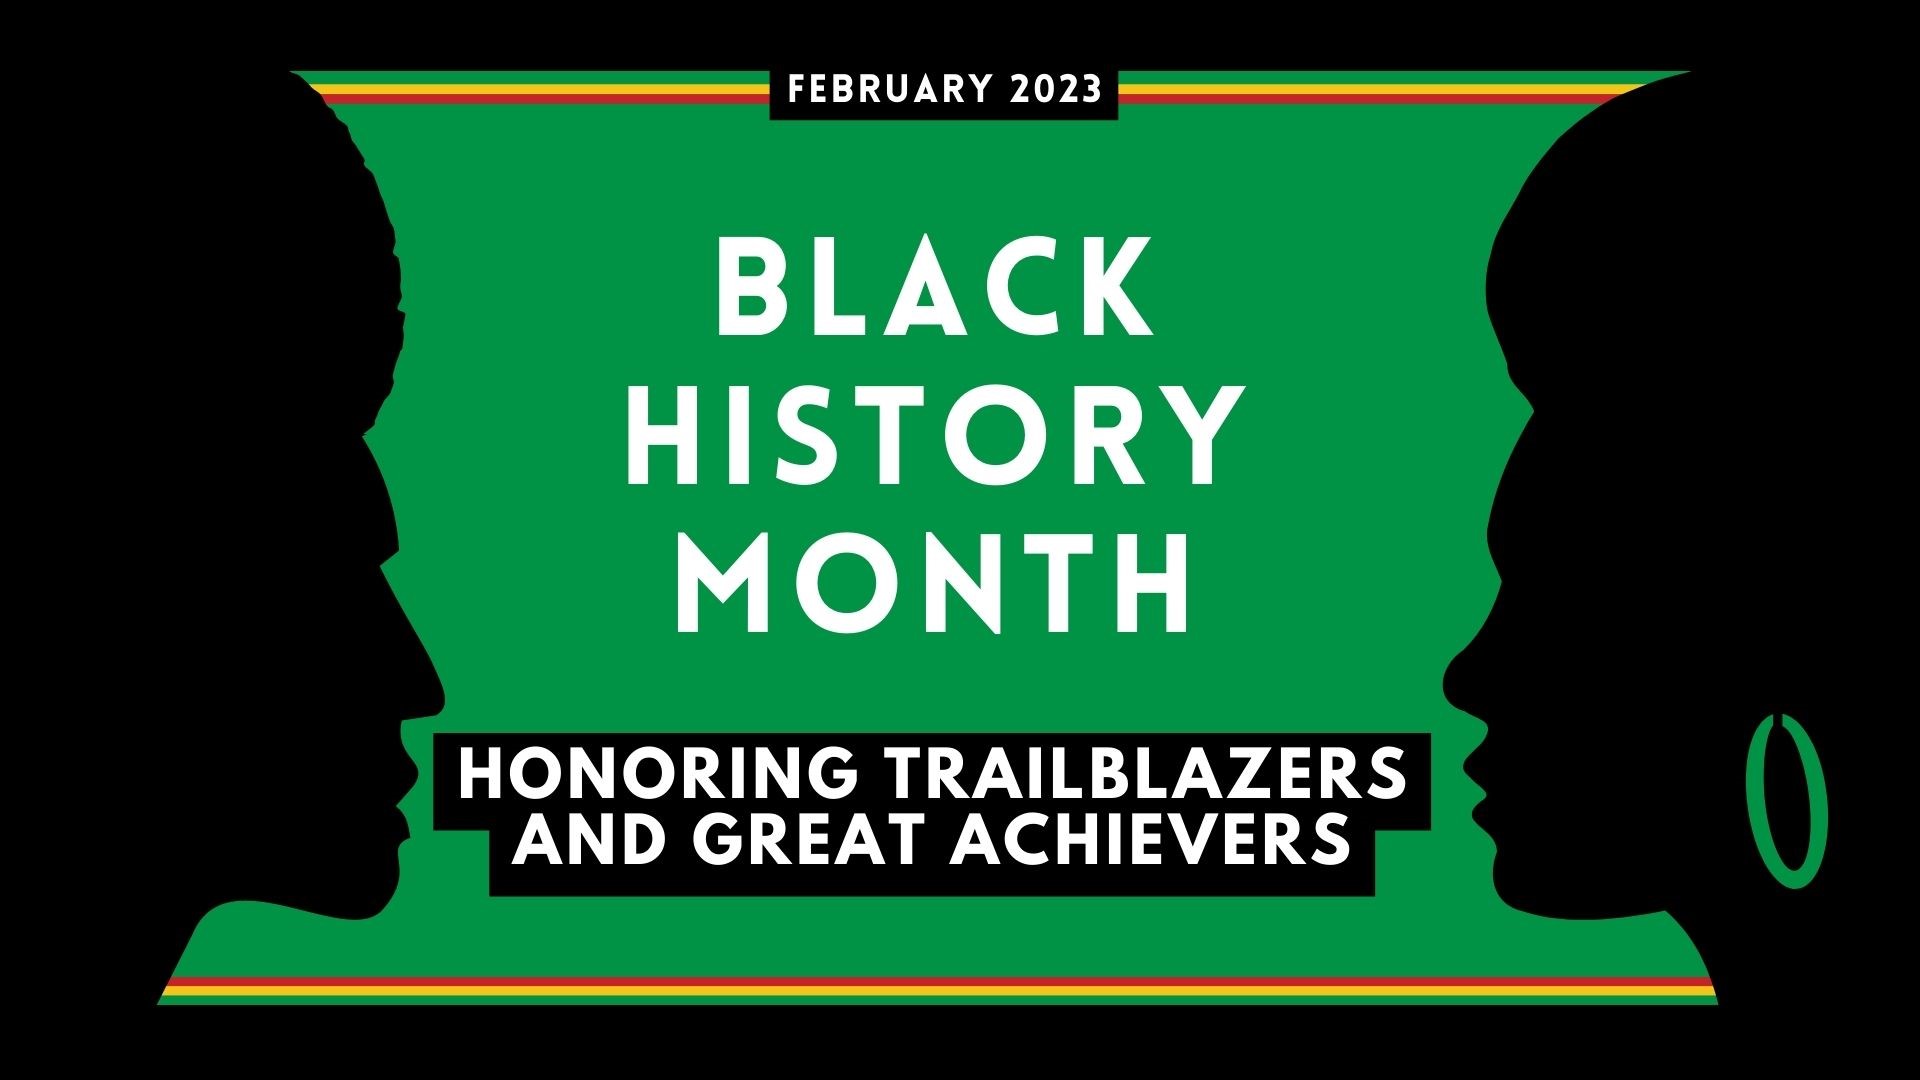 Black History Month: Honoring the trailblazers and great achieversnews.com